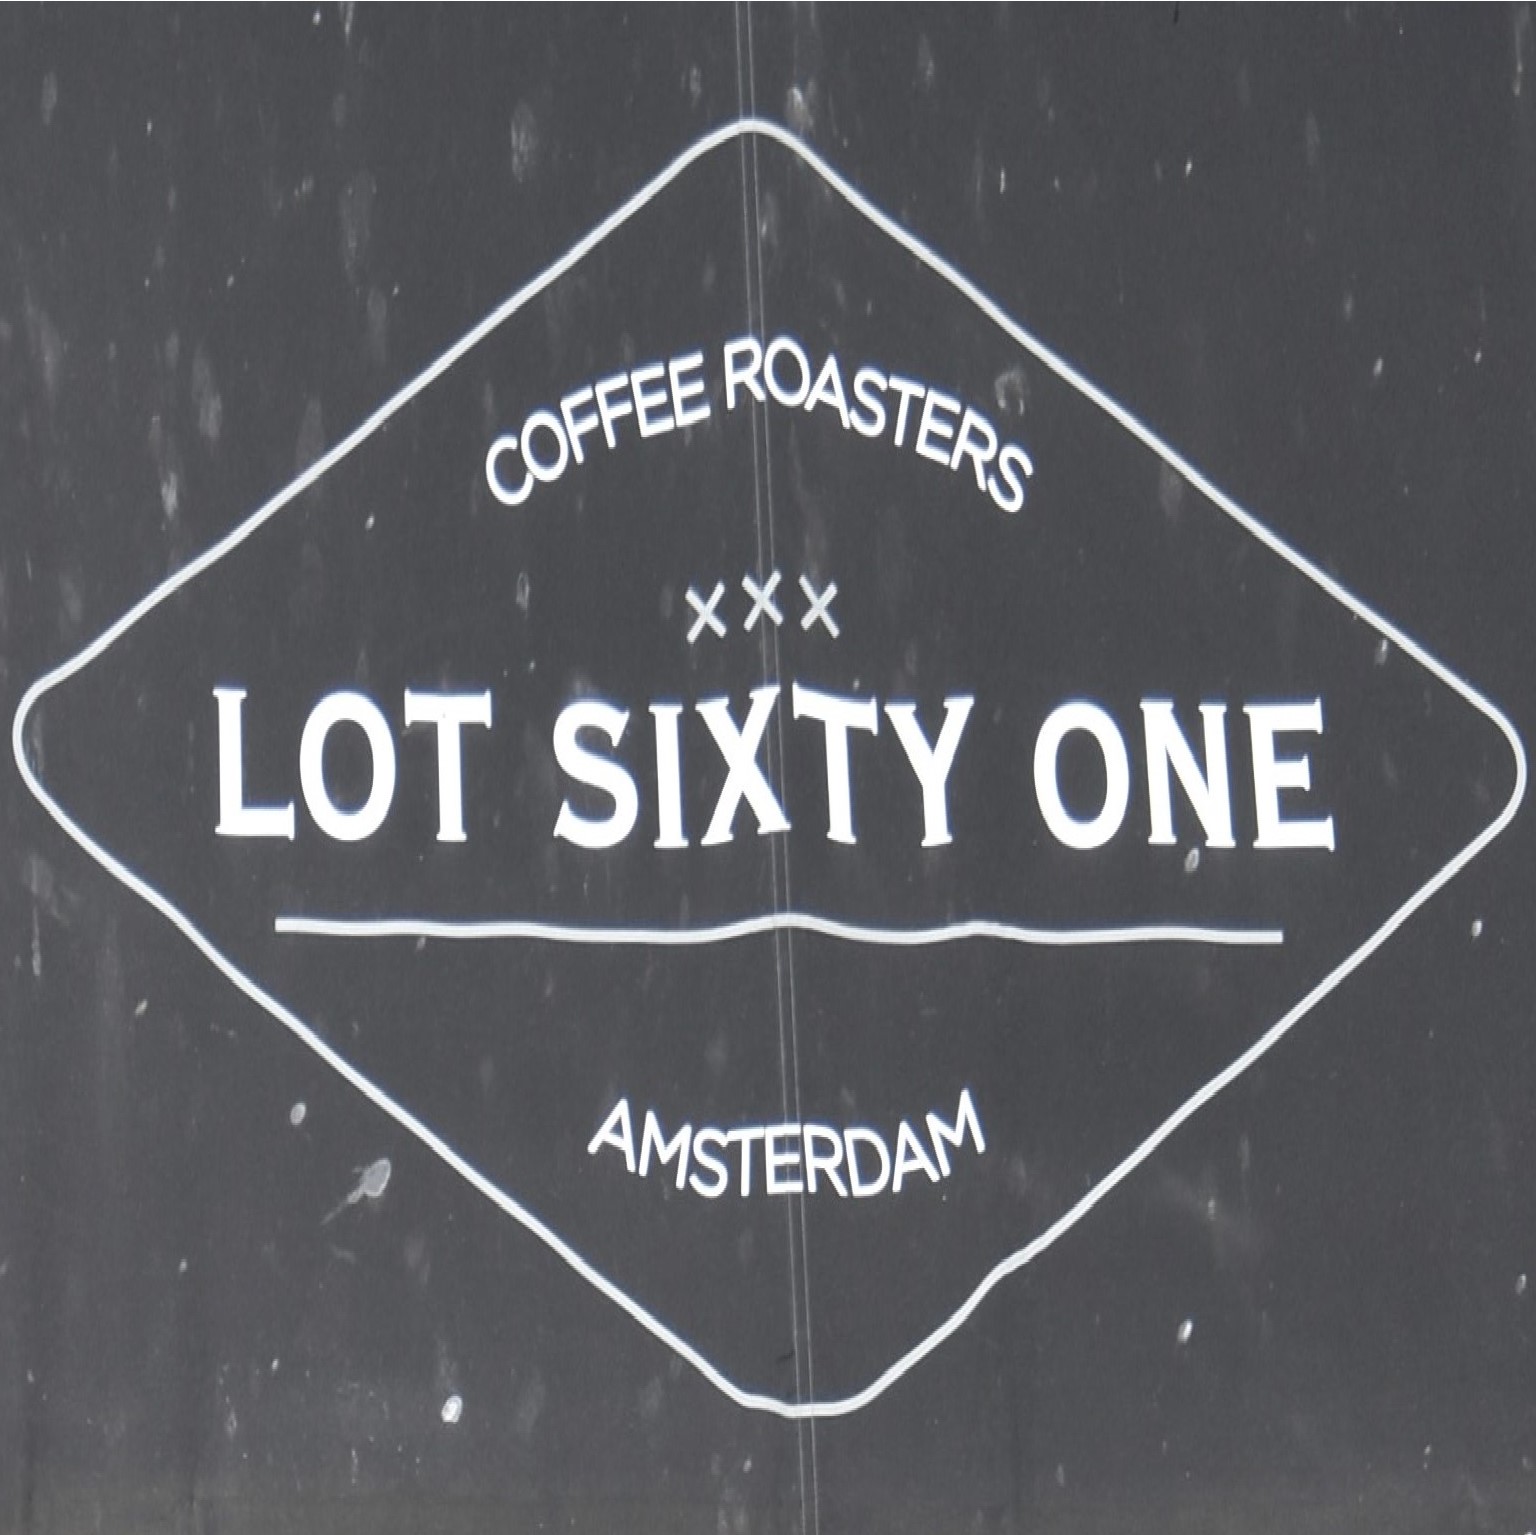 The Lot Sixty One Coffee Roasters logo from the awning outside the coffee shop on Kinkerstraat, west Amsterdam.